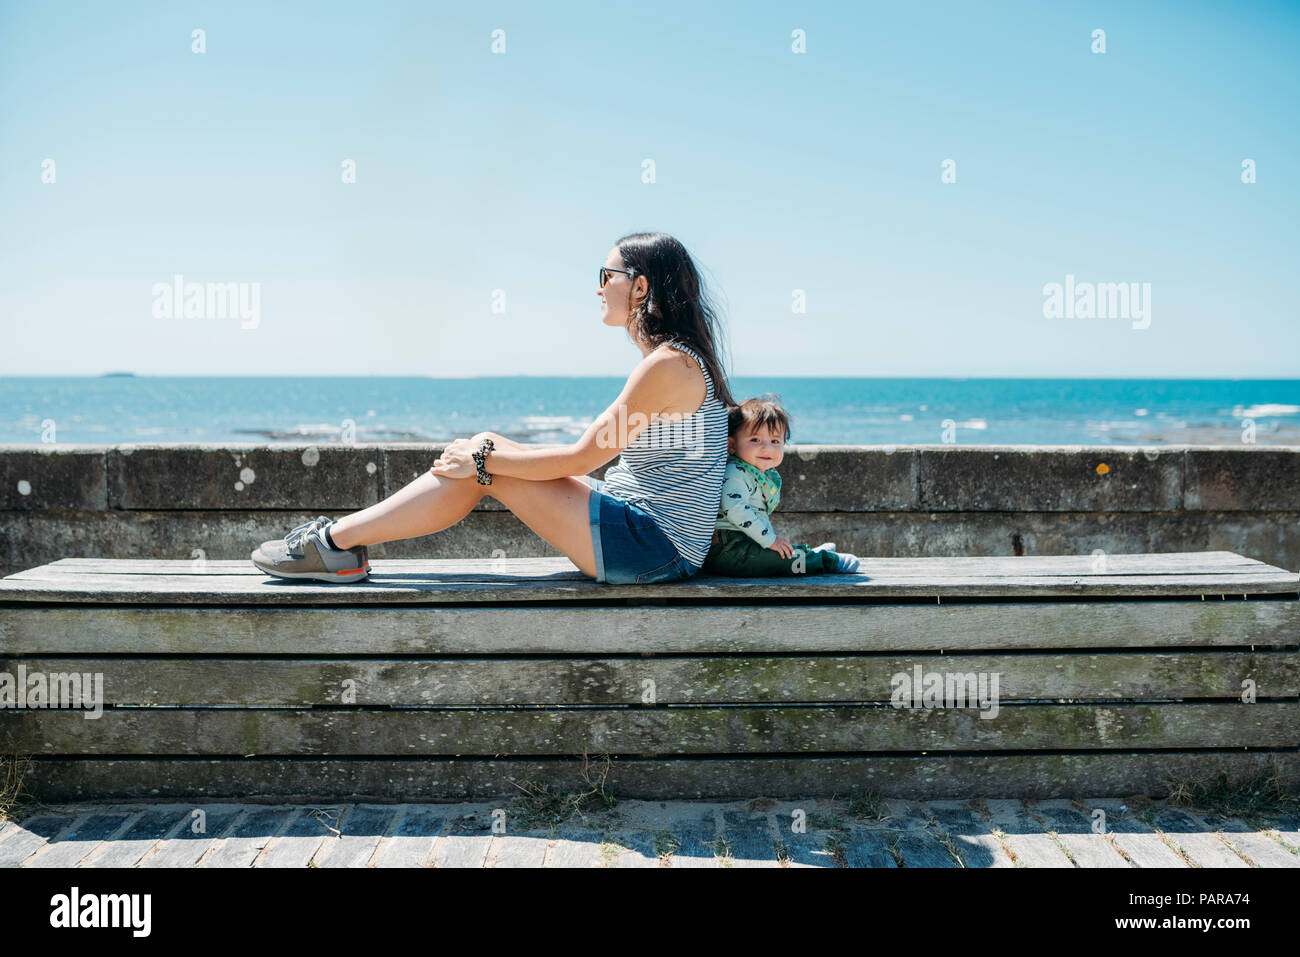 France, mother and baby girl sitting back to back on a bench at beach promenade Stock Photo